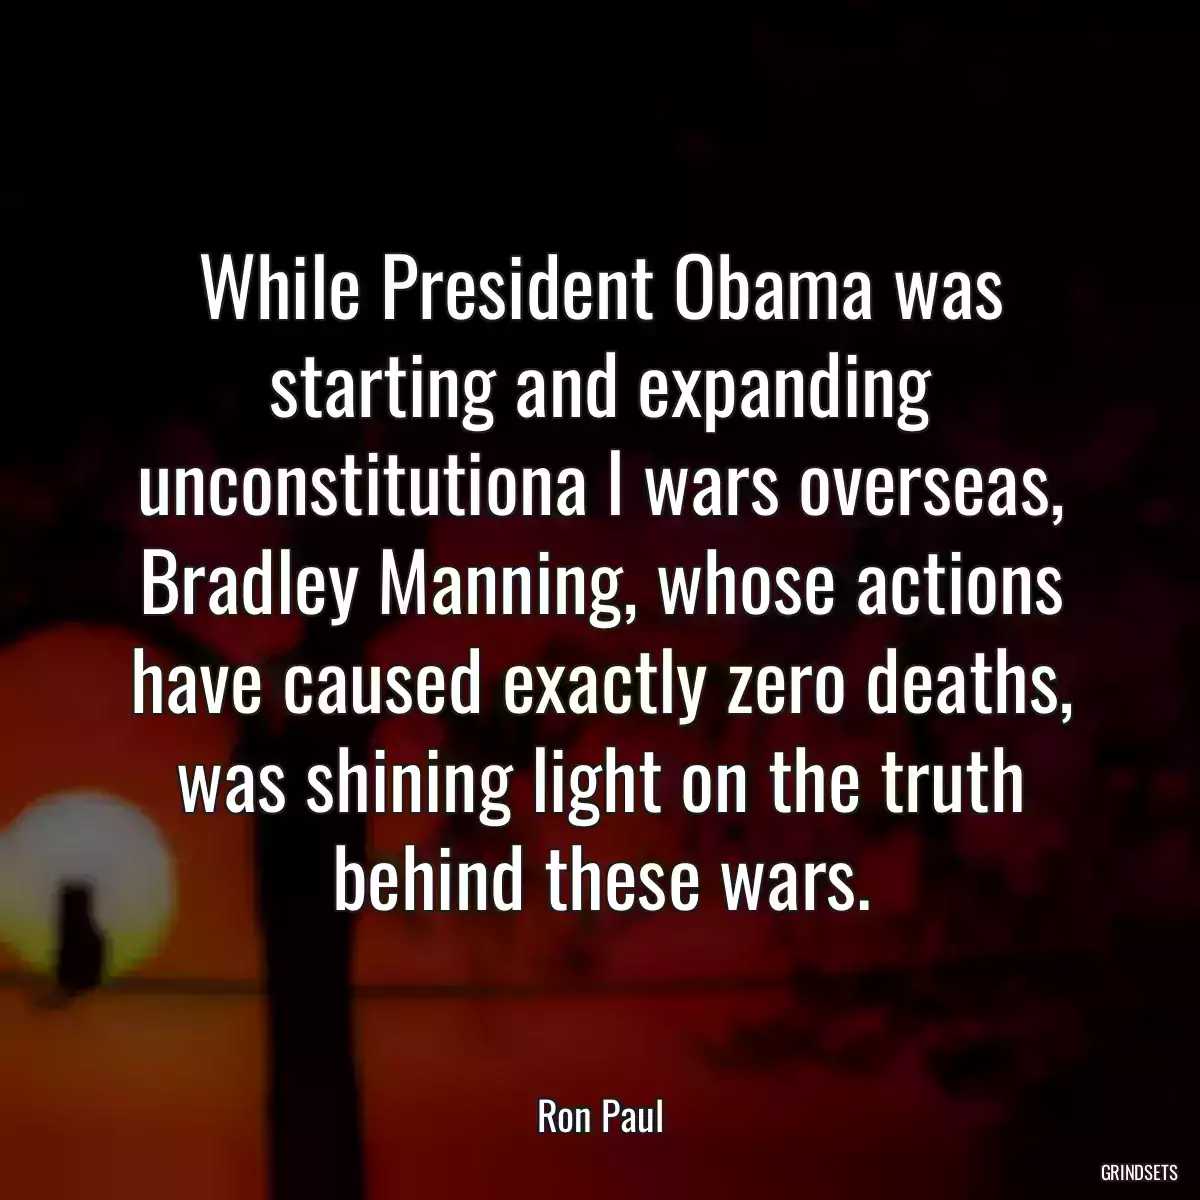 While President Obama was starting and expanding unconstitutiona l wars overseas, Bradley Manning, whose actions have caused exactly zero deaths, was shining light on the truth behind these wars.